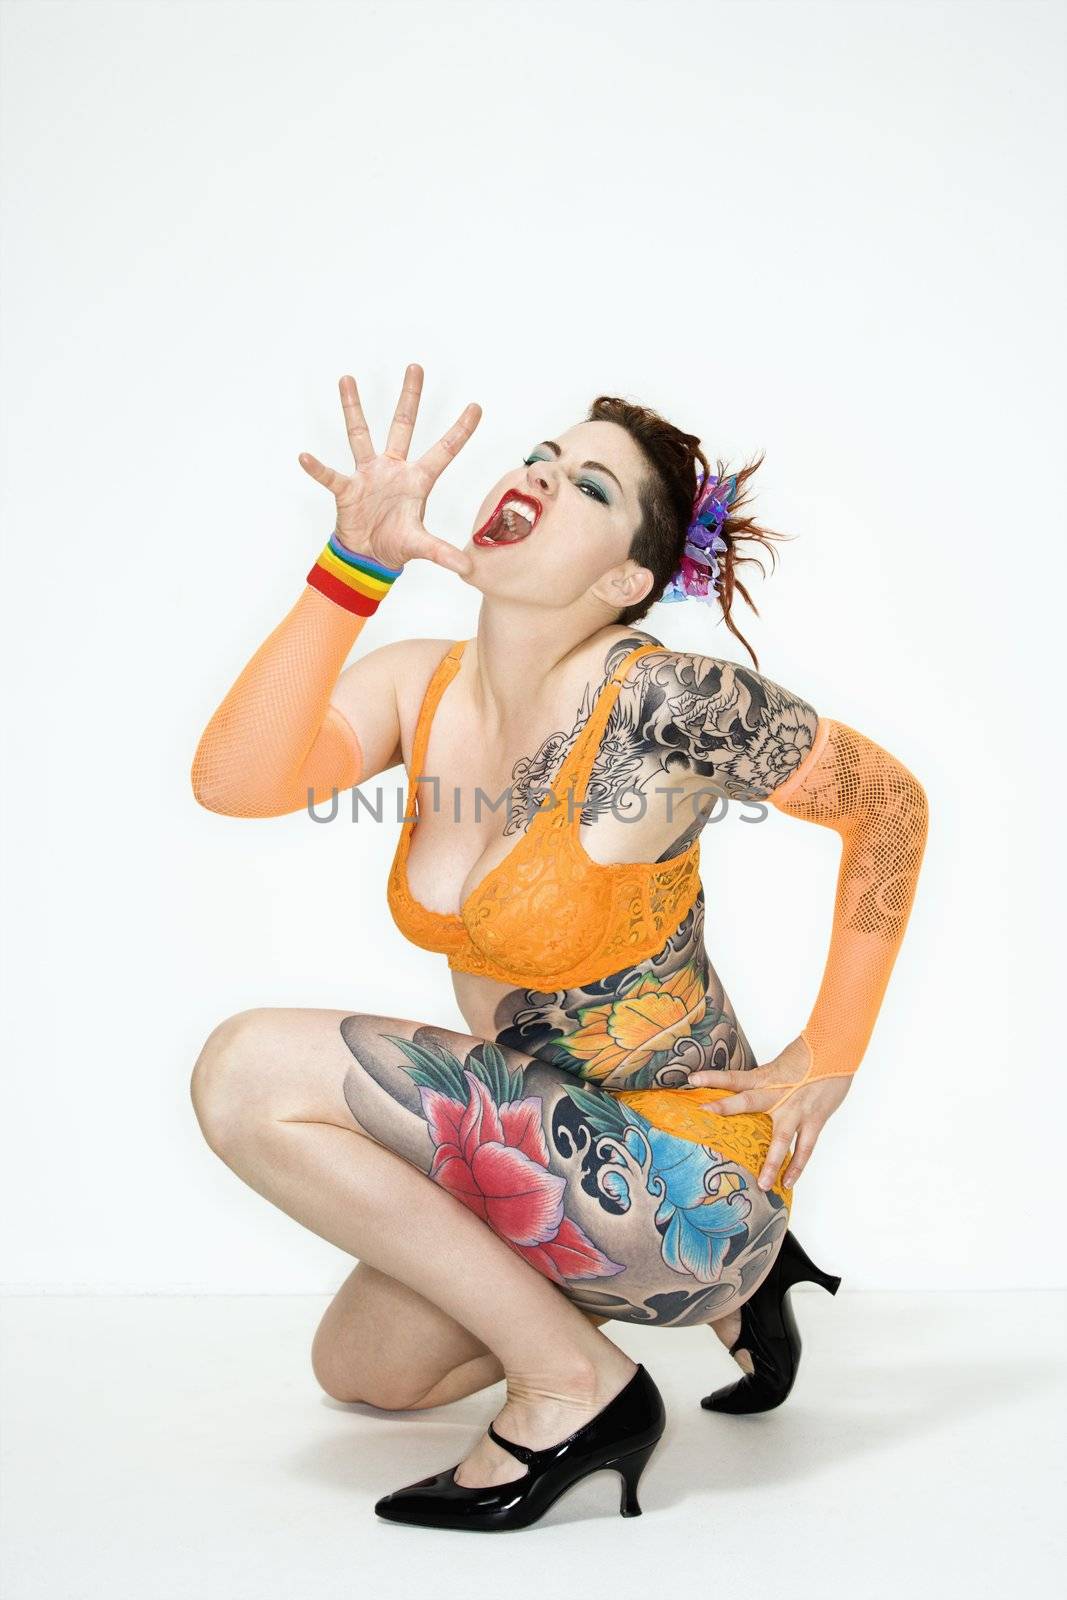 Adult caucasian woman with tattoos squatting on floor with hand out.